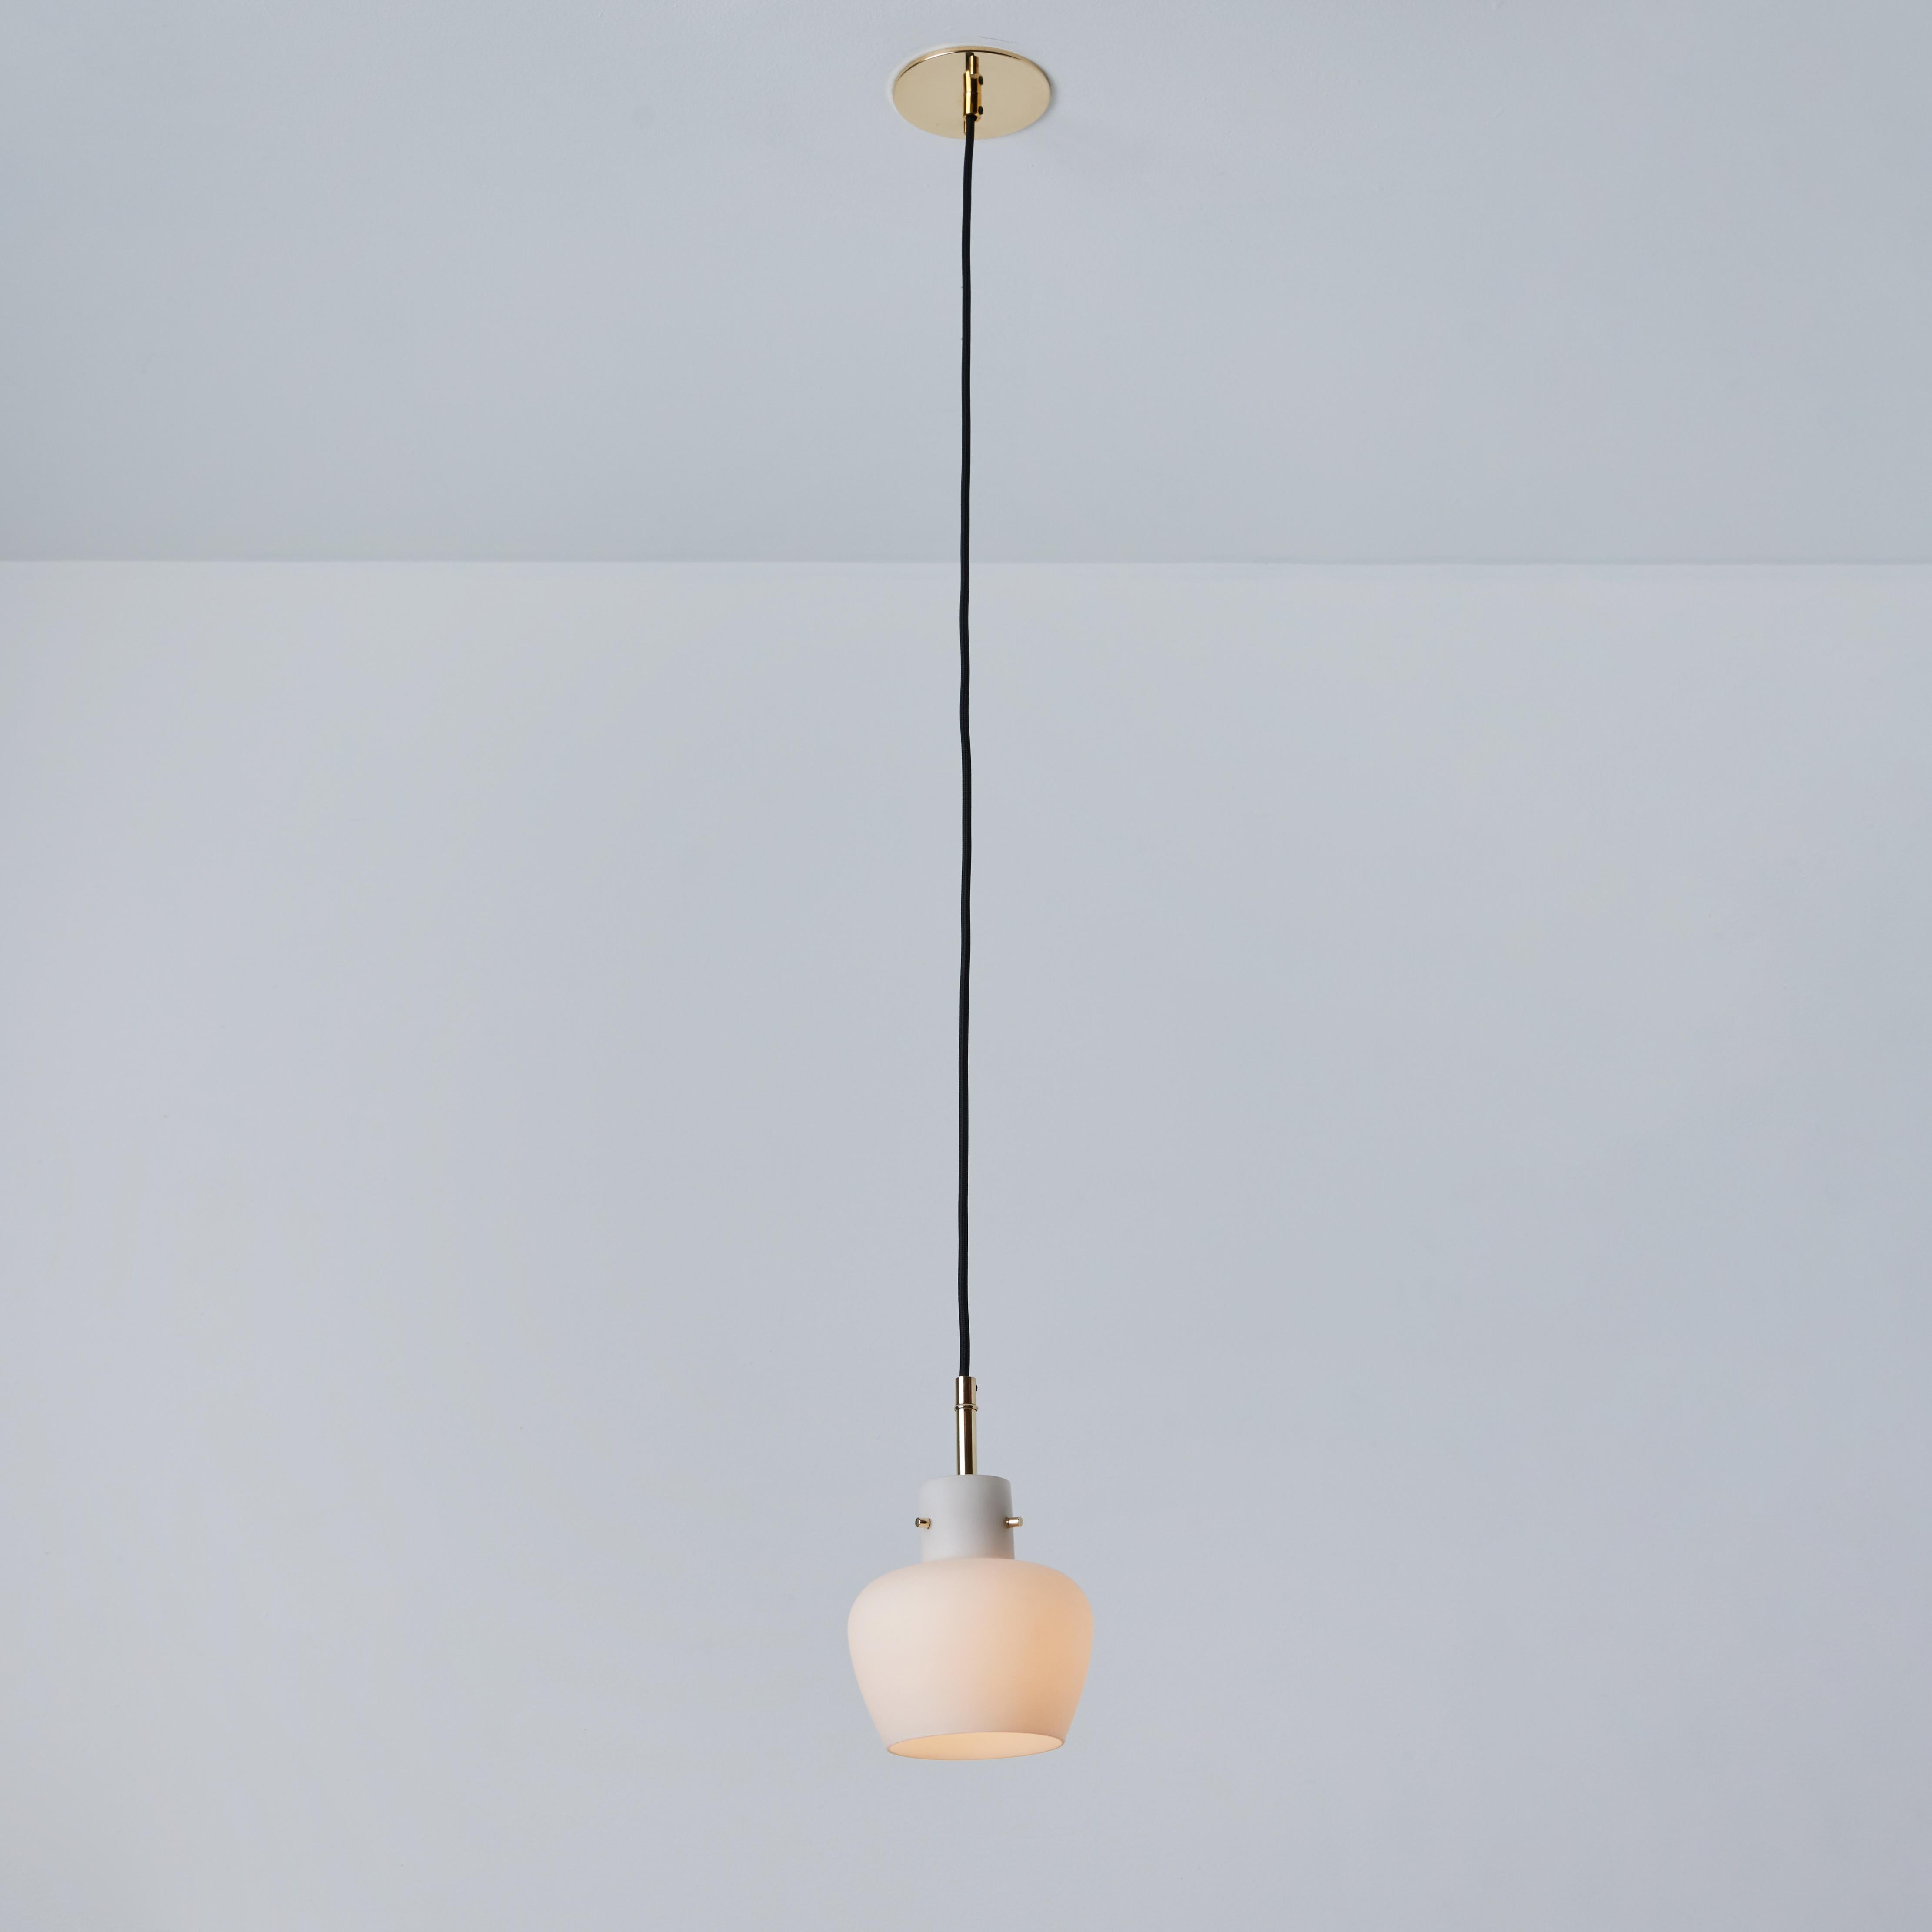 Pair of 1950s Opaline Glass Pendants in the Manner of Vilhelm Lauritzen. Executed in opaline matte glass and polished brass. A lyrical and elegant Danish modern design with a sculptural form characteristic of Lauritzen's finest work of the